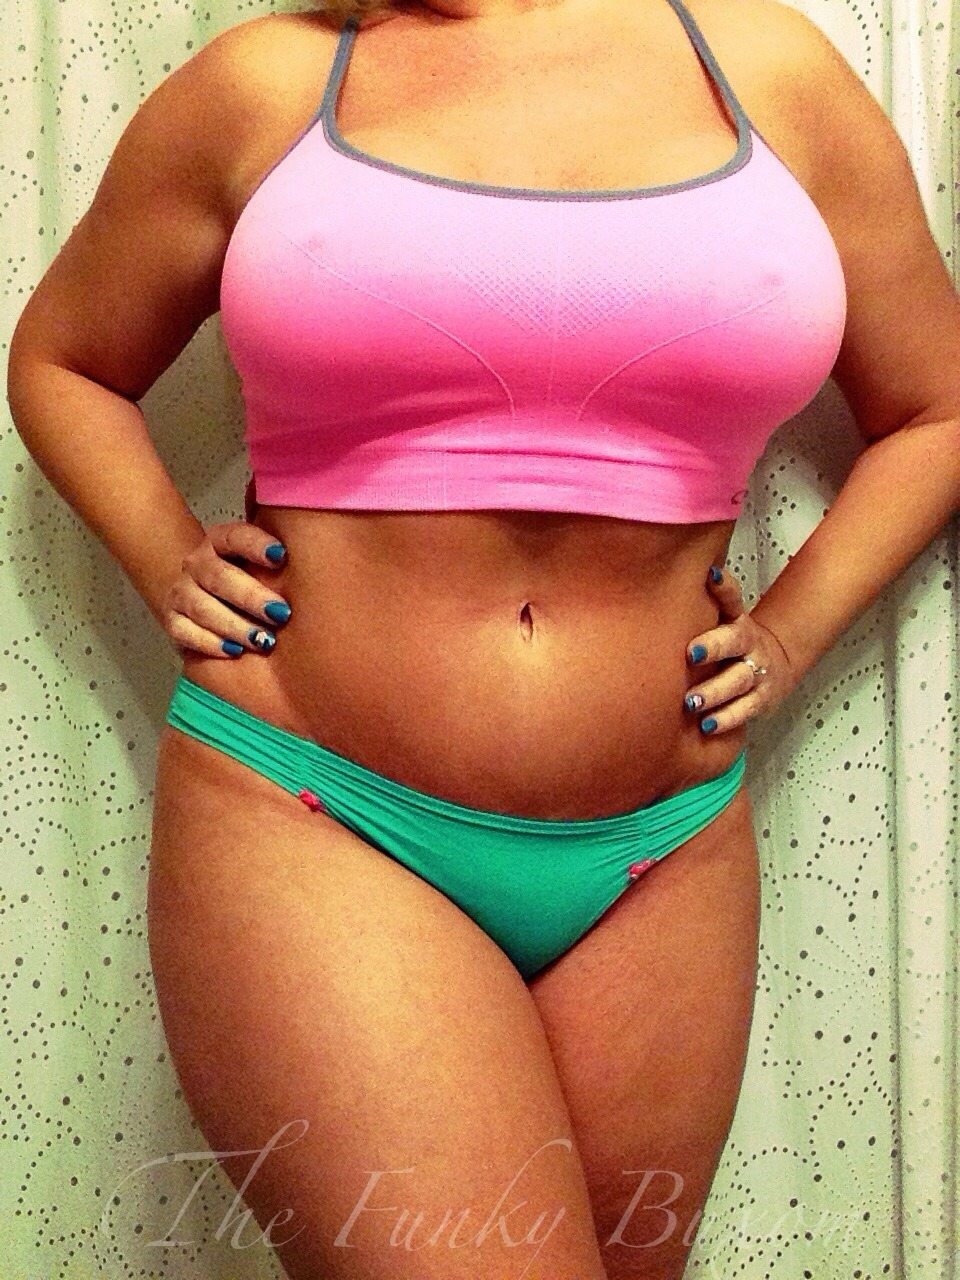 thefunkybuxom:  Happy St Patricks Day!!! Better late than never…. I wore my pink